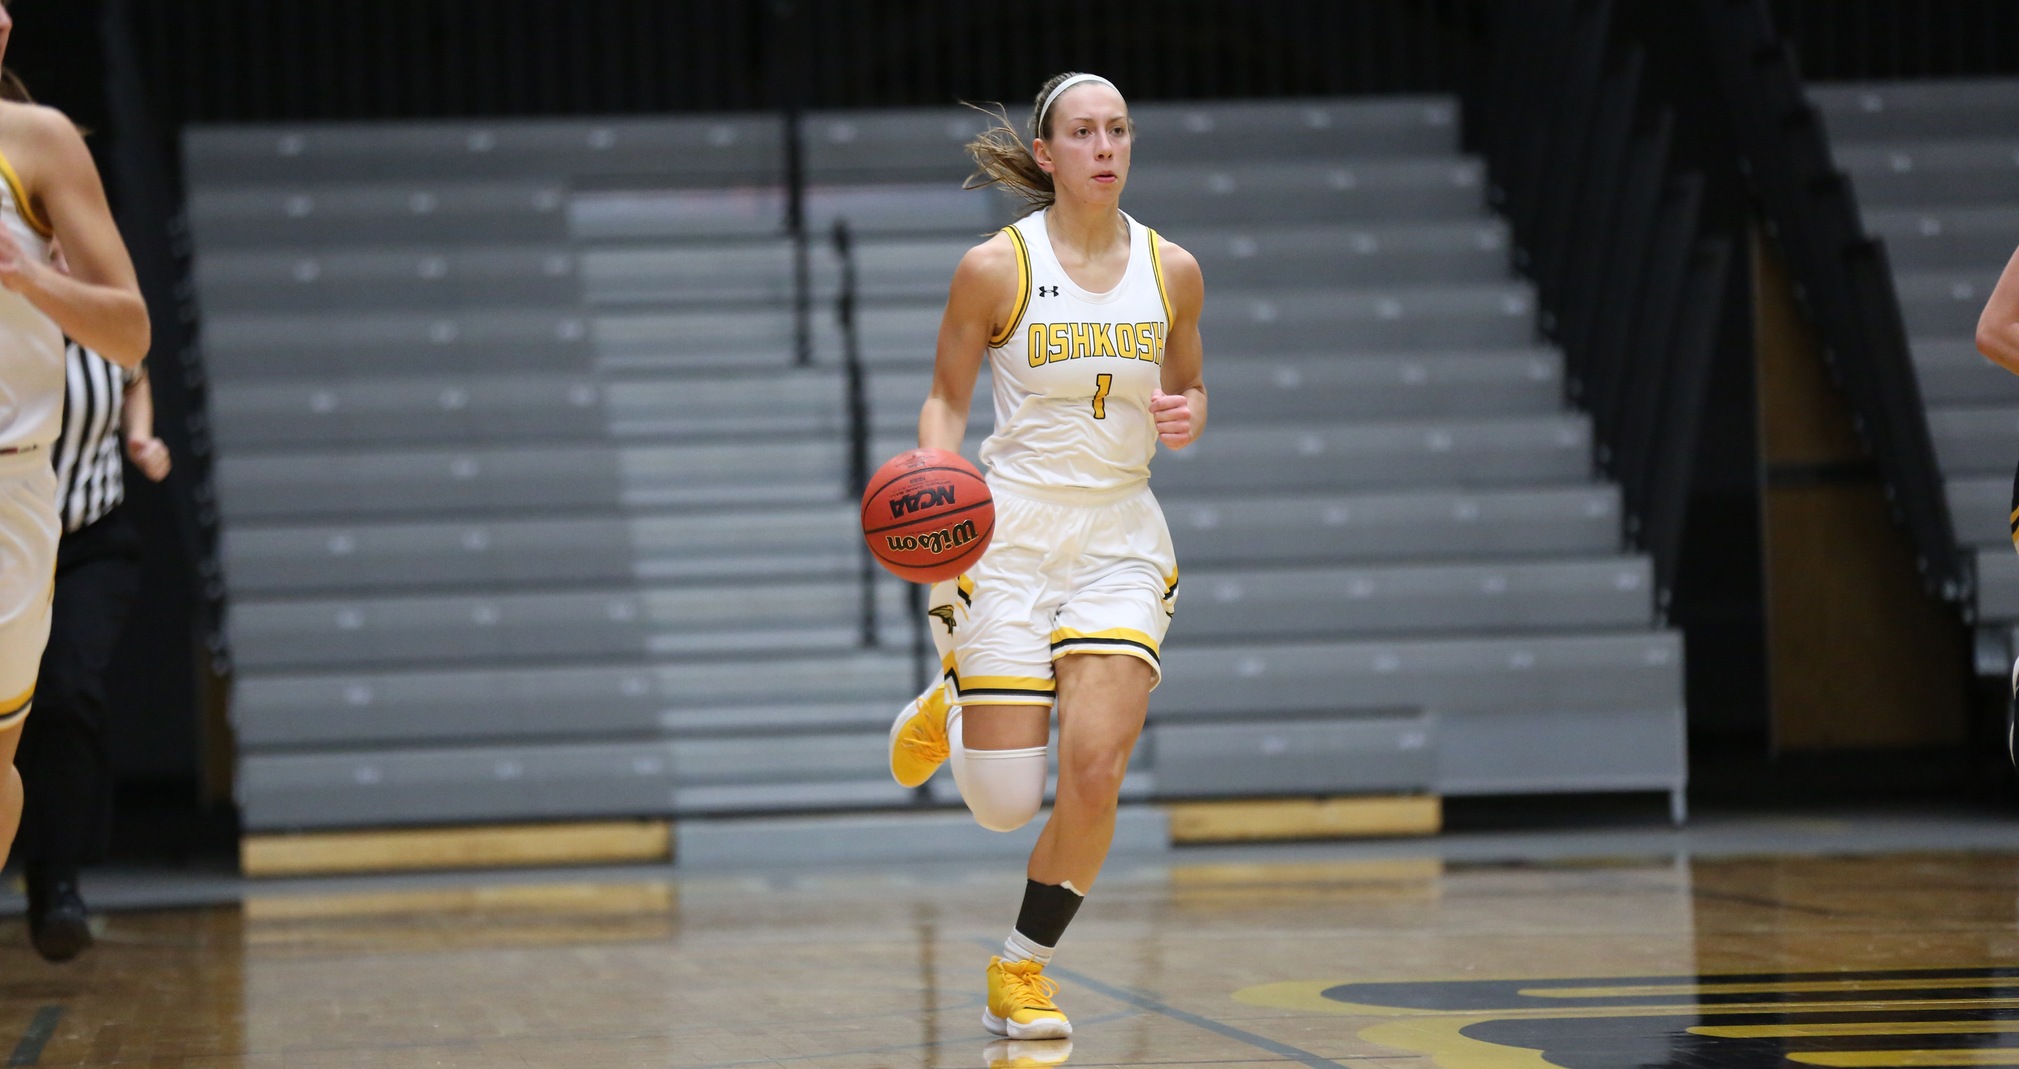 Olivia Campbell scored 15 points and grabbed six rebounds, both team bests, against the Blugolds.